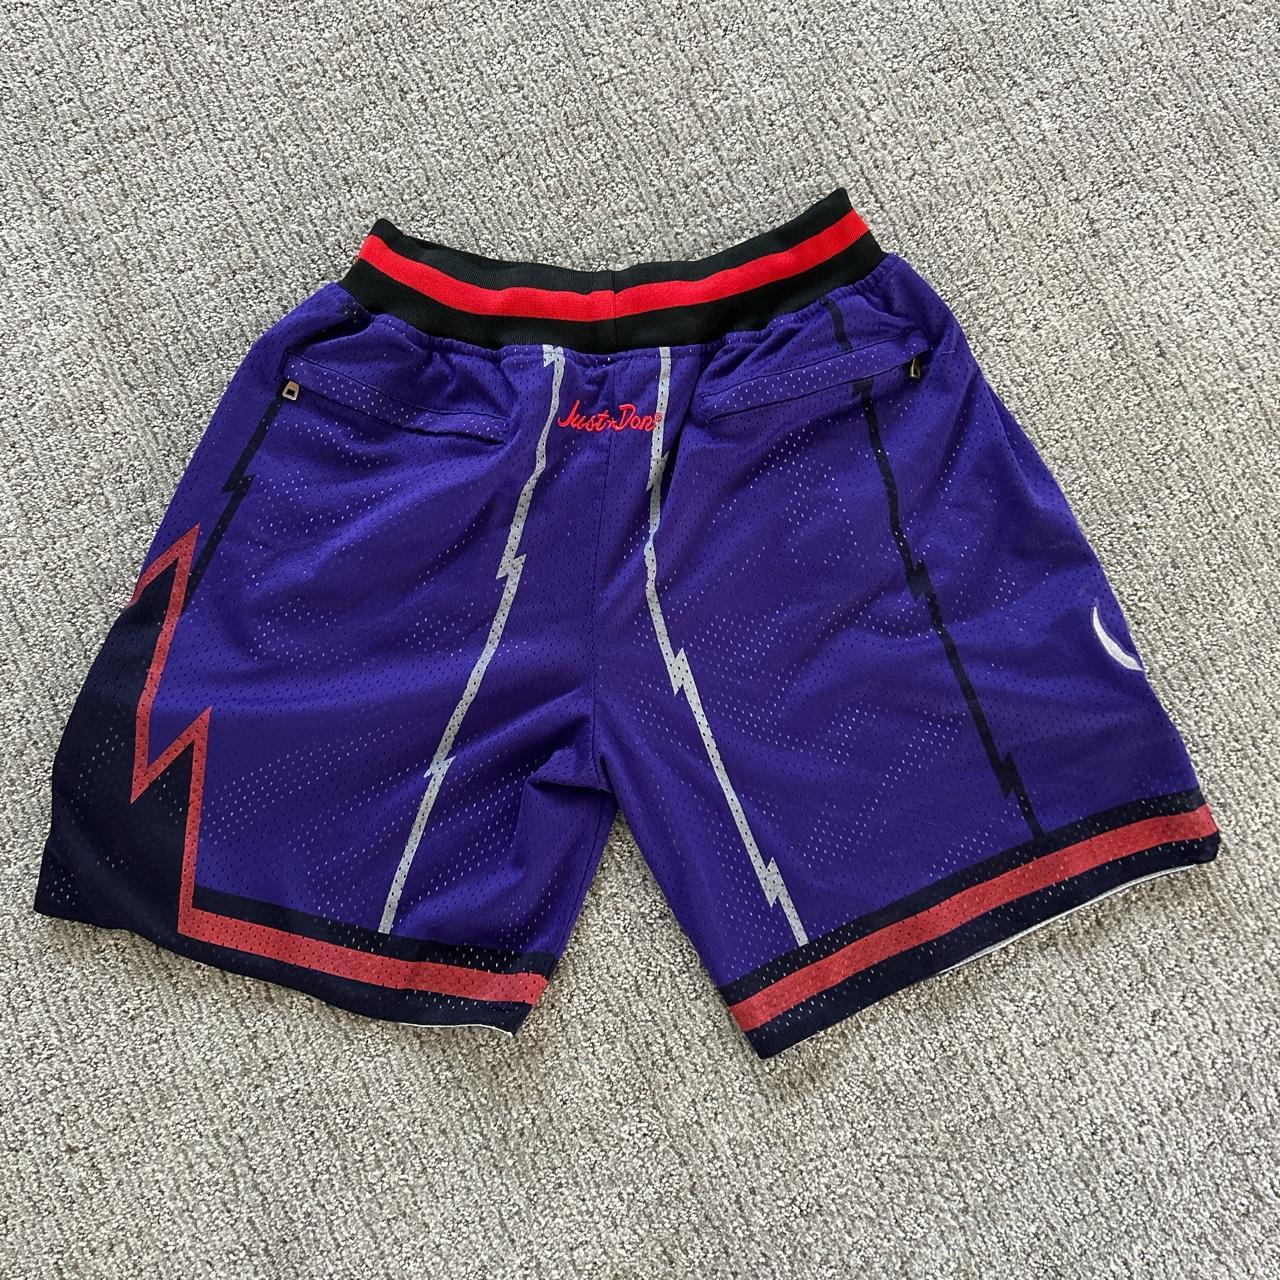 Vintage Toronto Raptors Just Don shorts from late